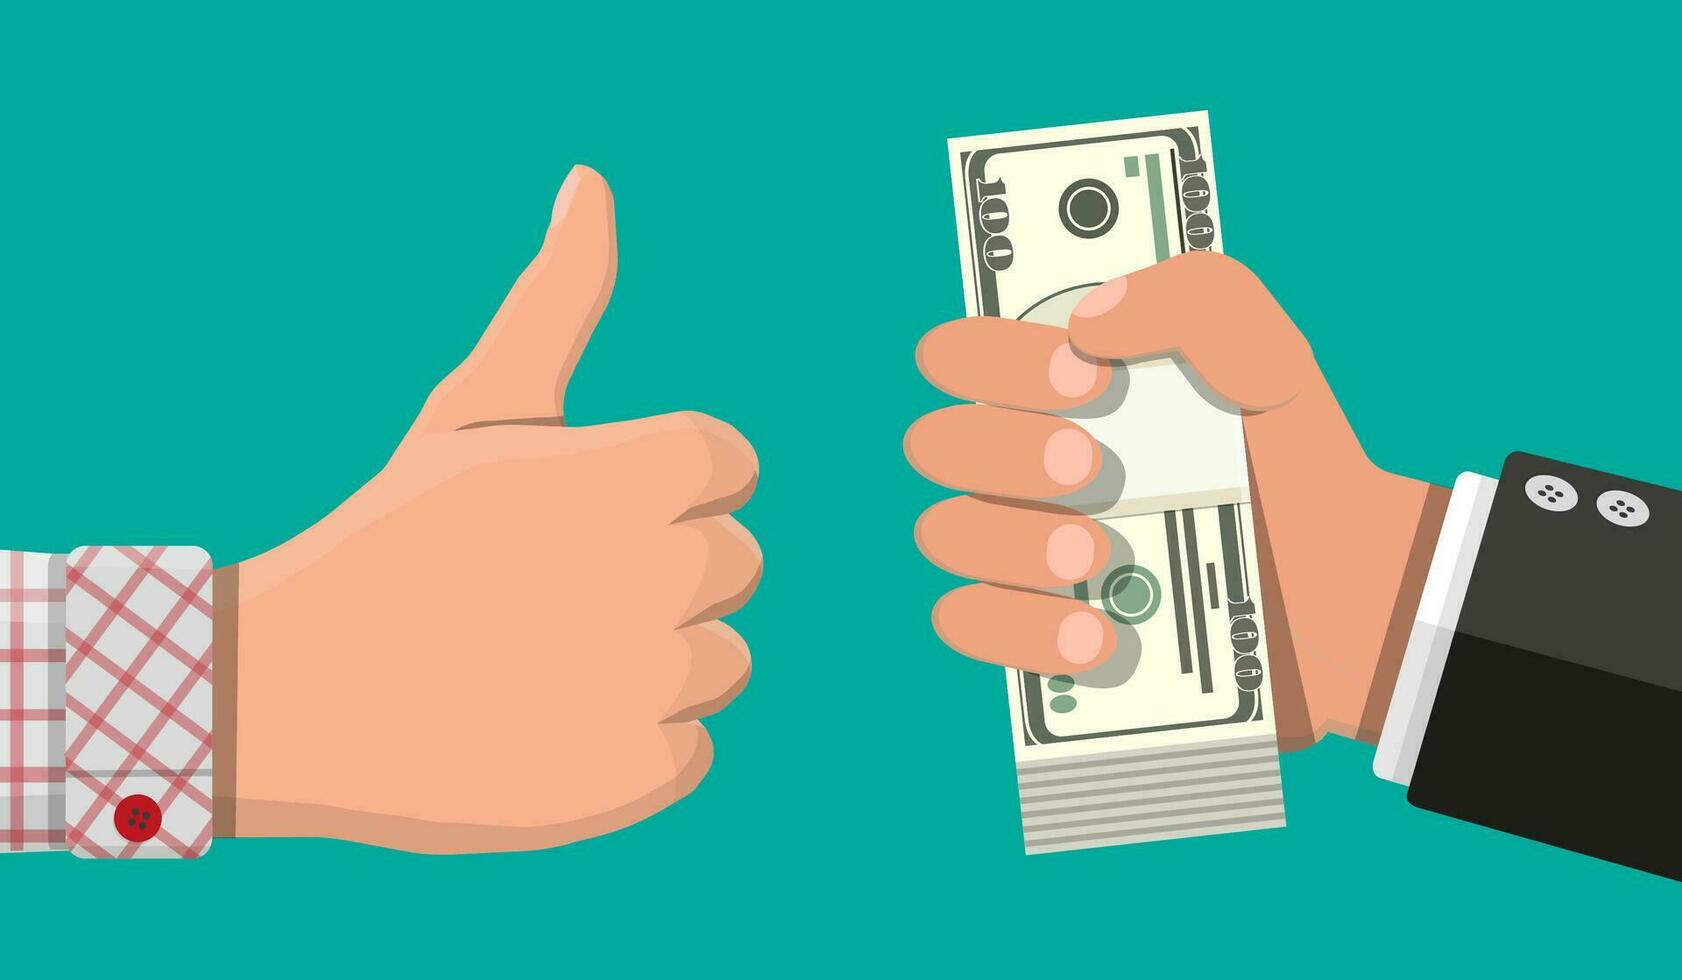 Stack of dollar banknotes in hand and thumb up. Concept of savings, donation, paying. Symbol of wealth. Vector illustration in flat style